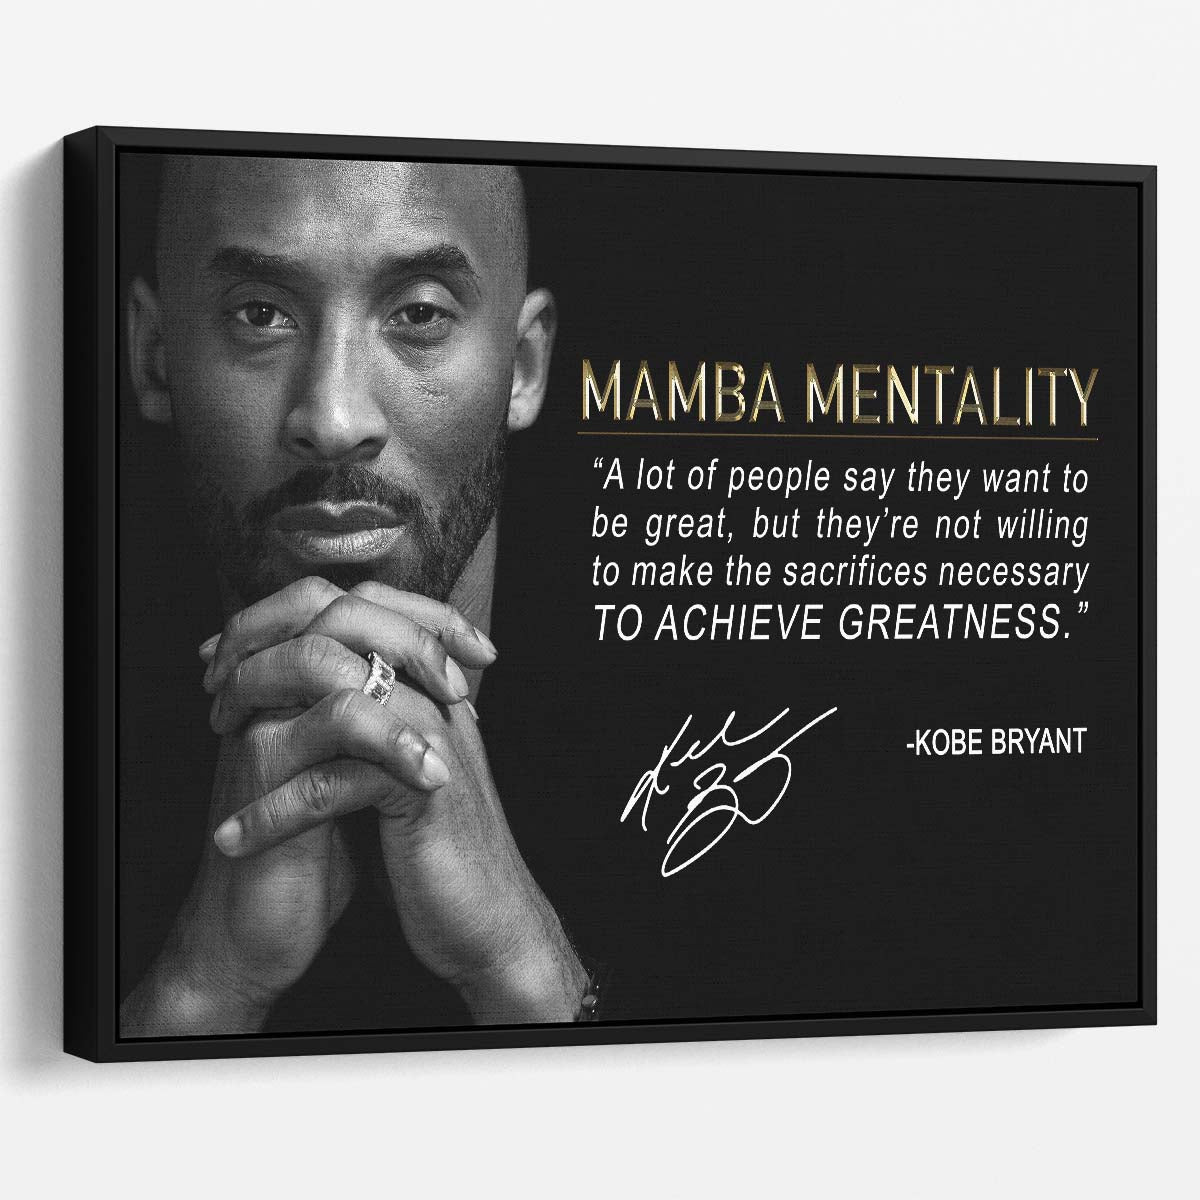 Kobe Bryant Sacrifice To Achieve Greatness Wall Art by Luxuriance Designs. Made in USA.